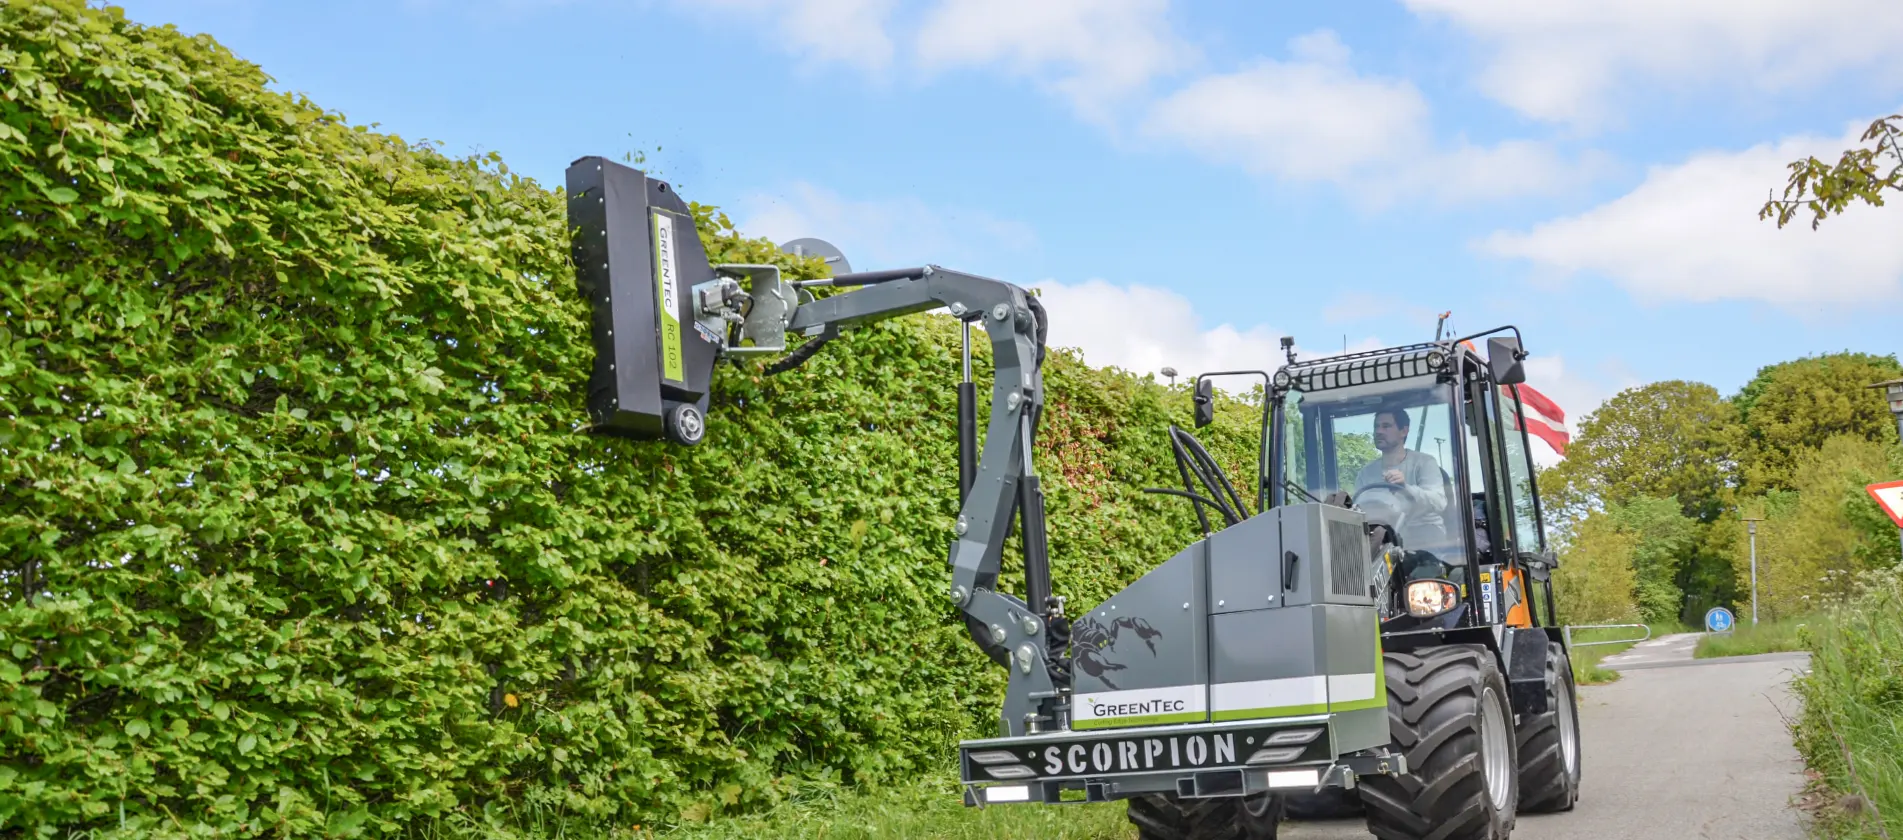 Hedge cutting equipment mounted on skid steer loader